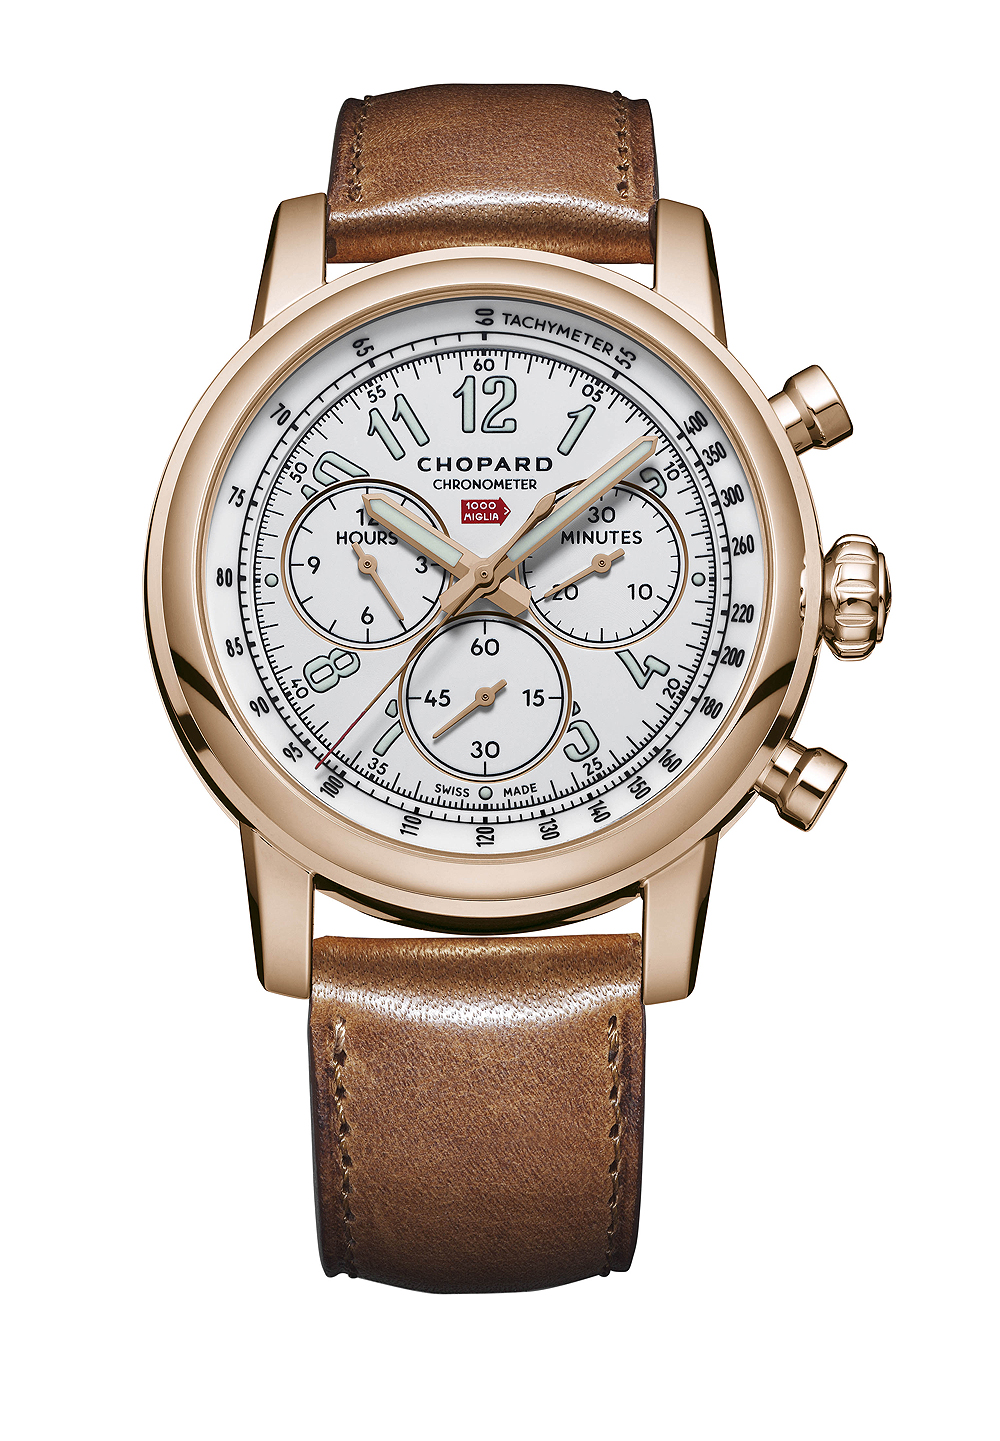 Chopard Celebrates 90 Years of Mille Miglia with Limited-Edition Watch